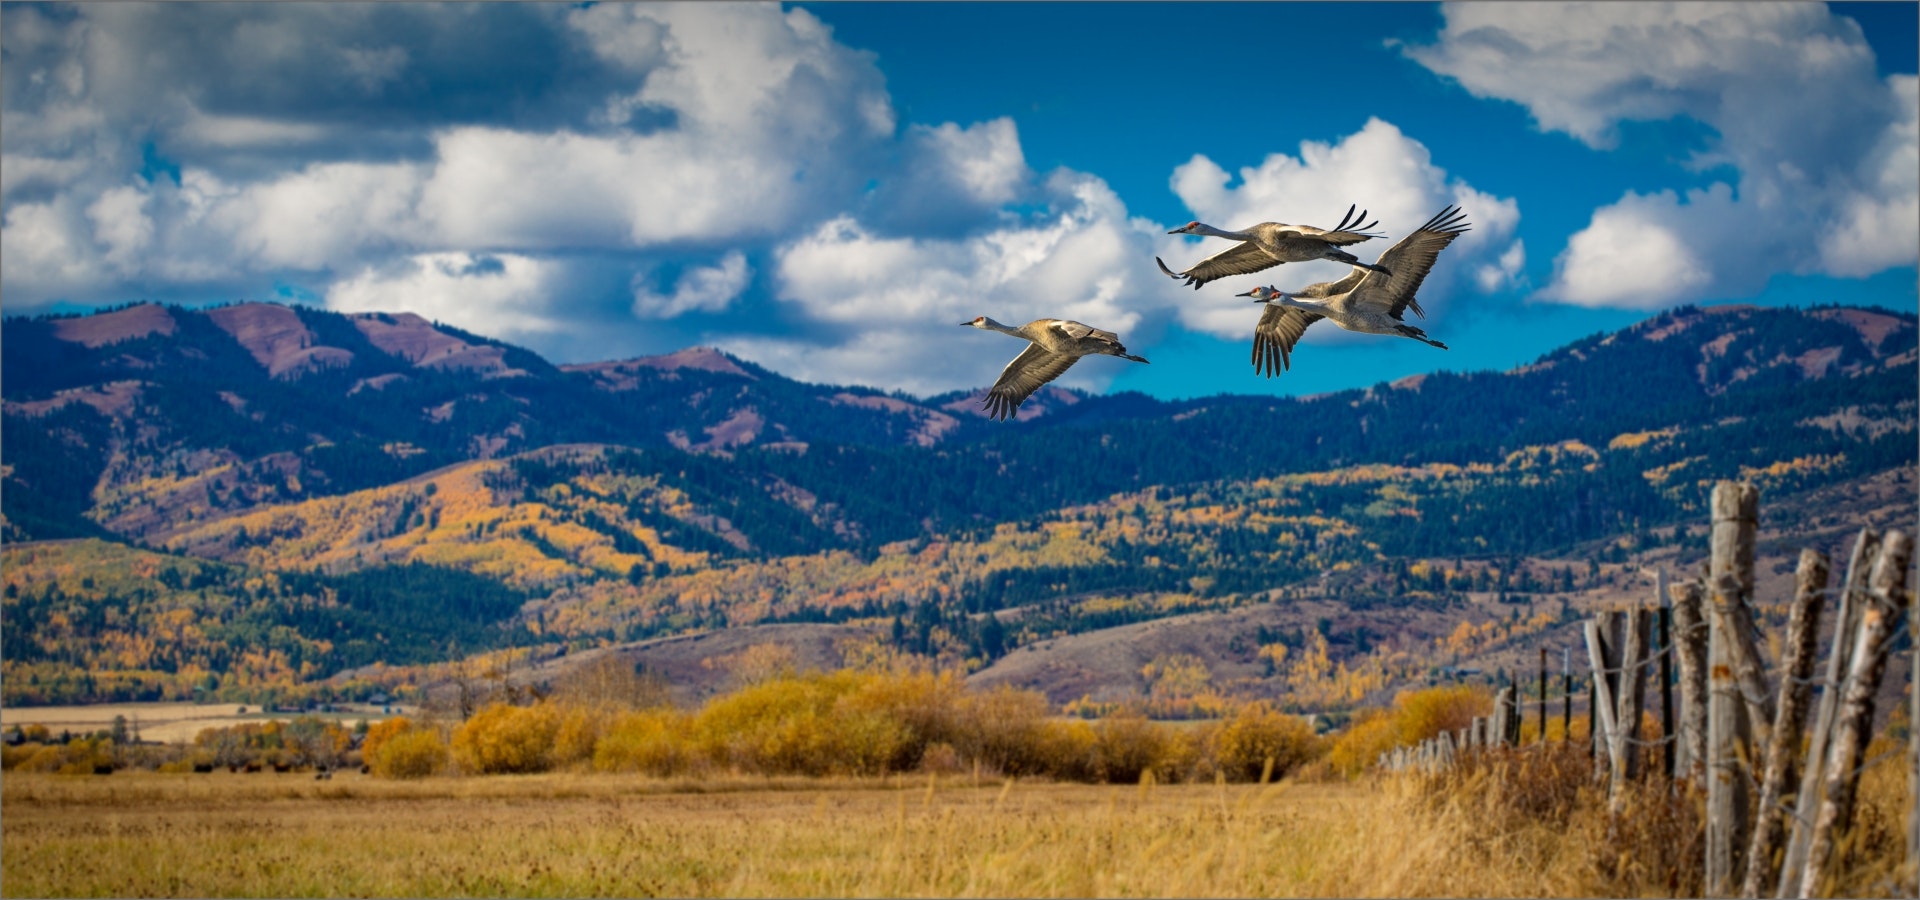 Sandhill Cranes flying over a field in front of the mountains in Victor, Idaho